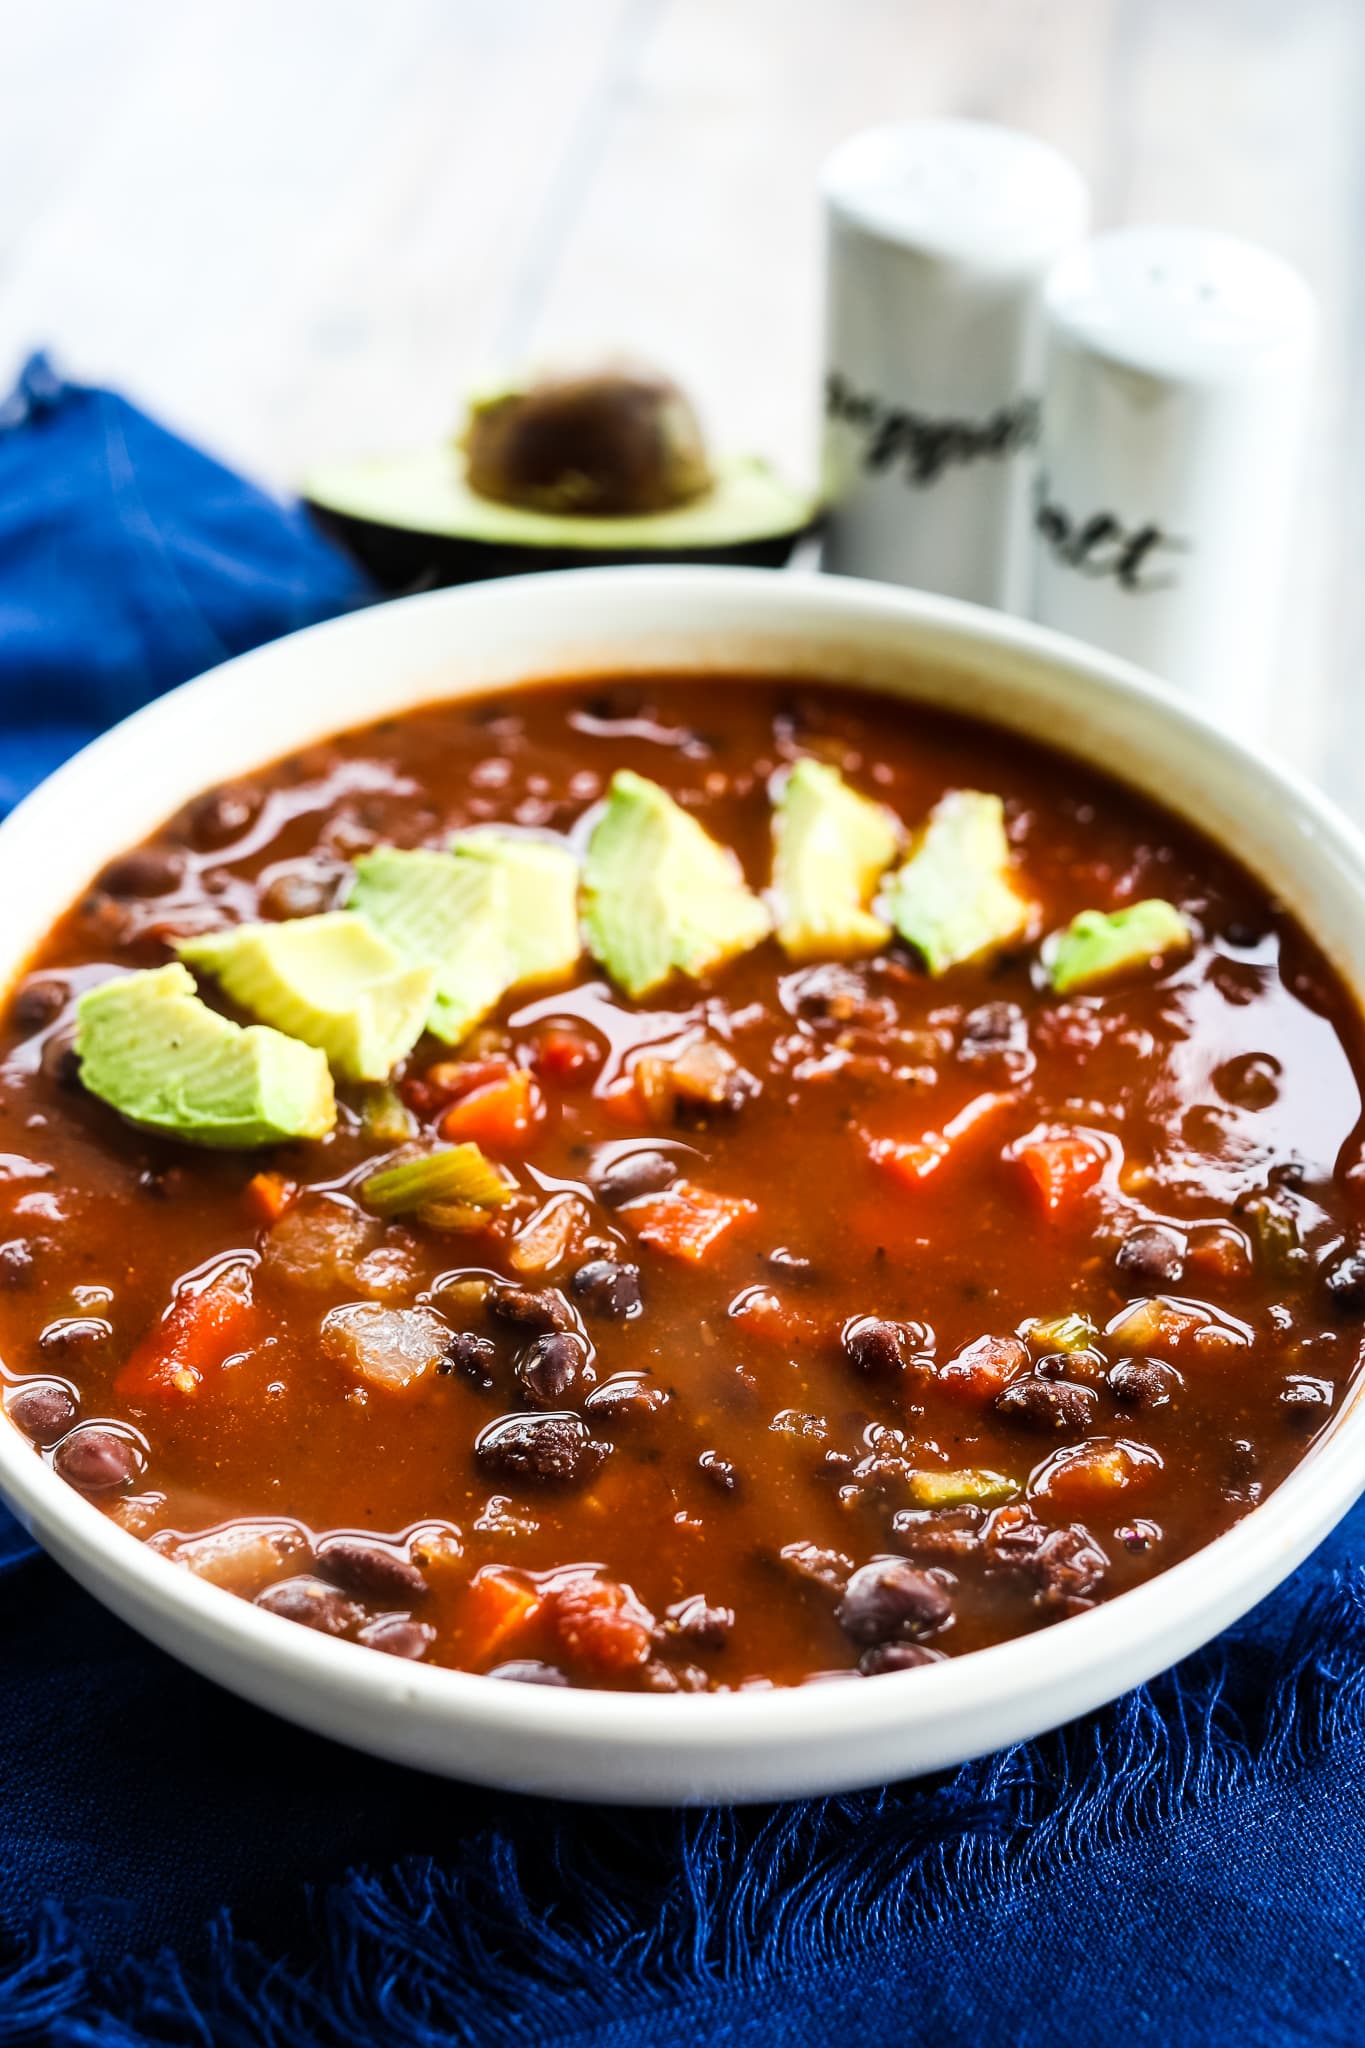 spicy black bean soup with avocado slices on top and salt and pepper in the background and a blue napkin